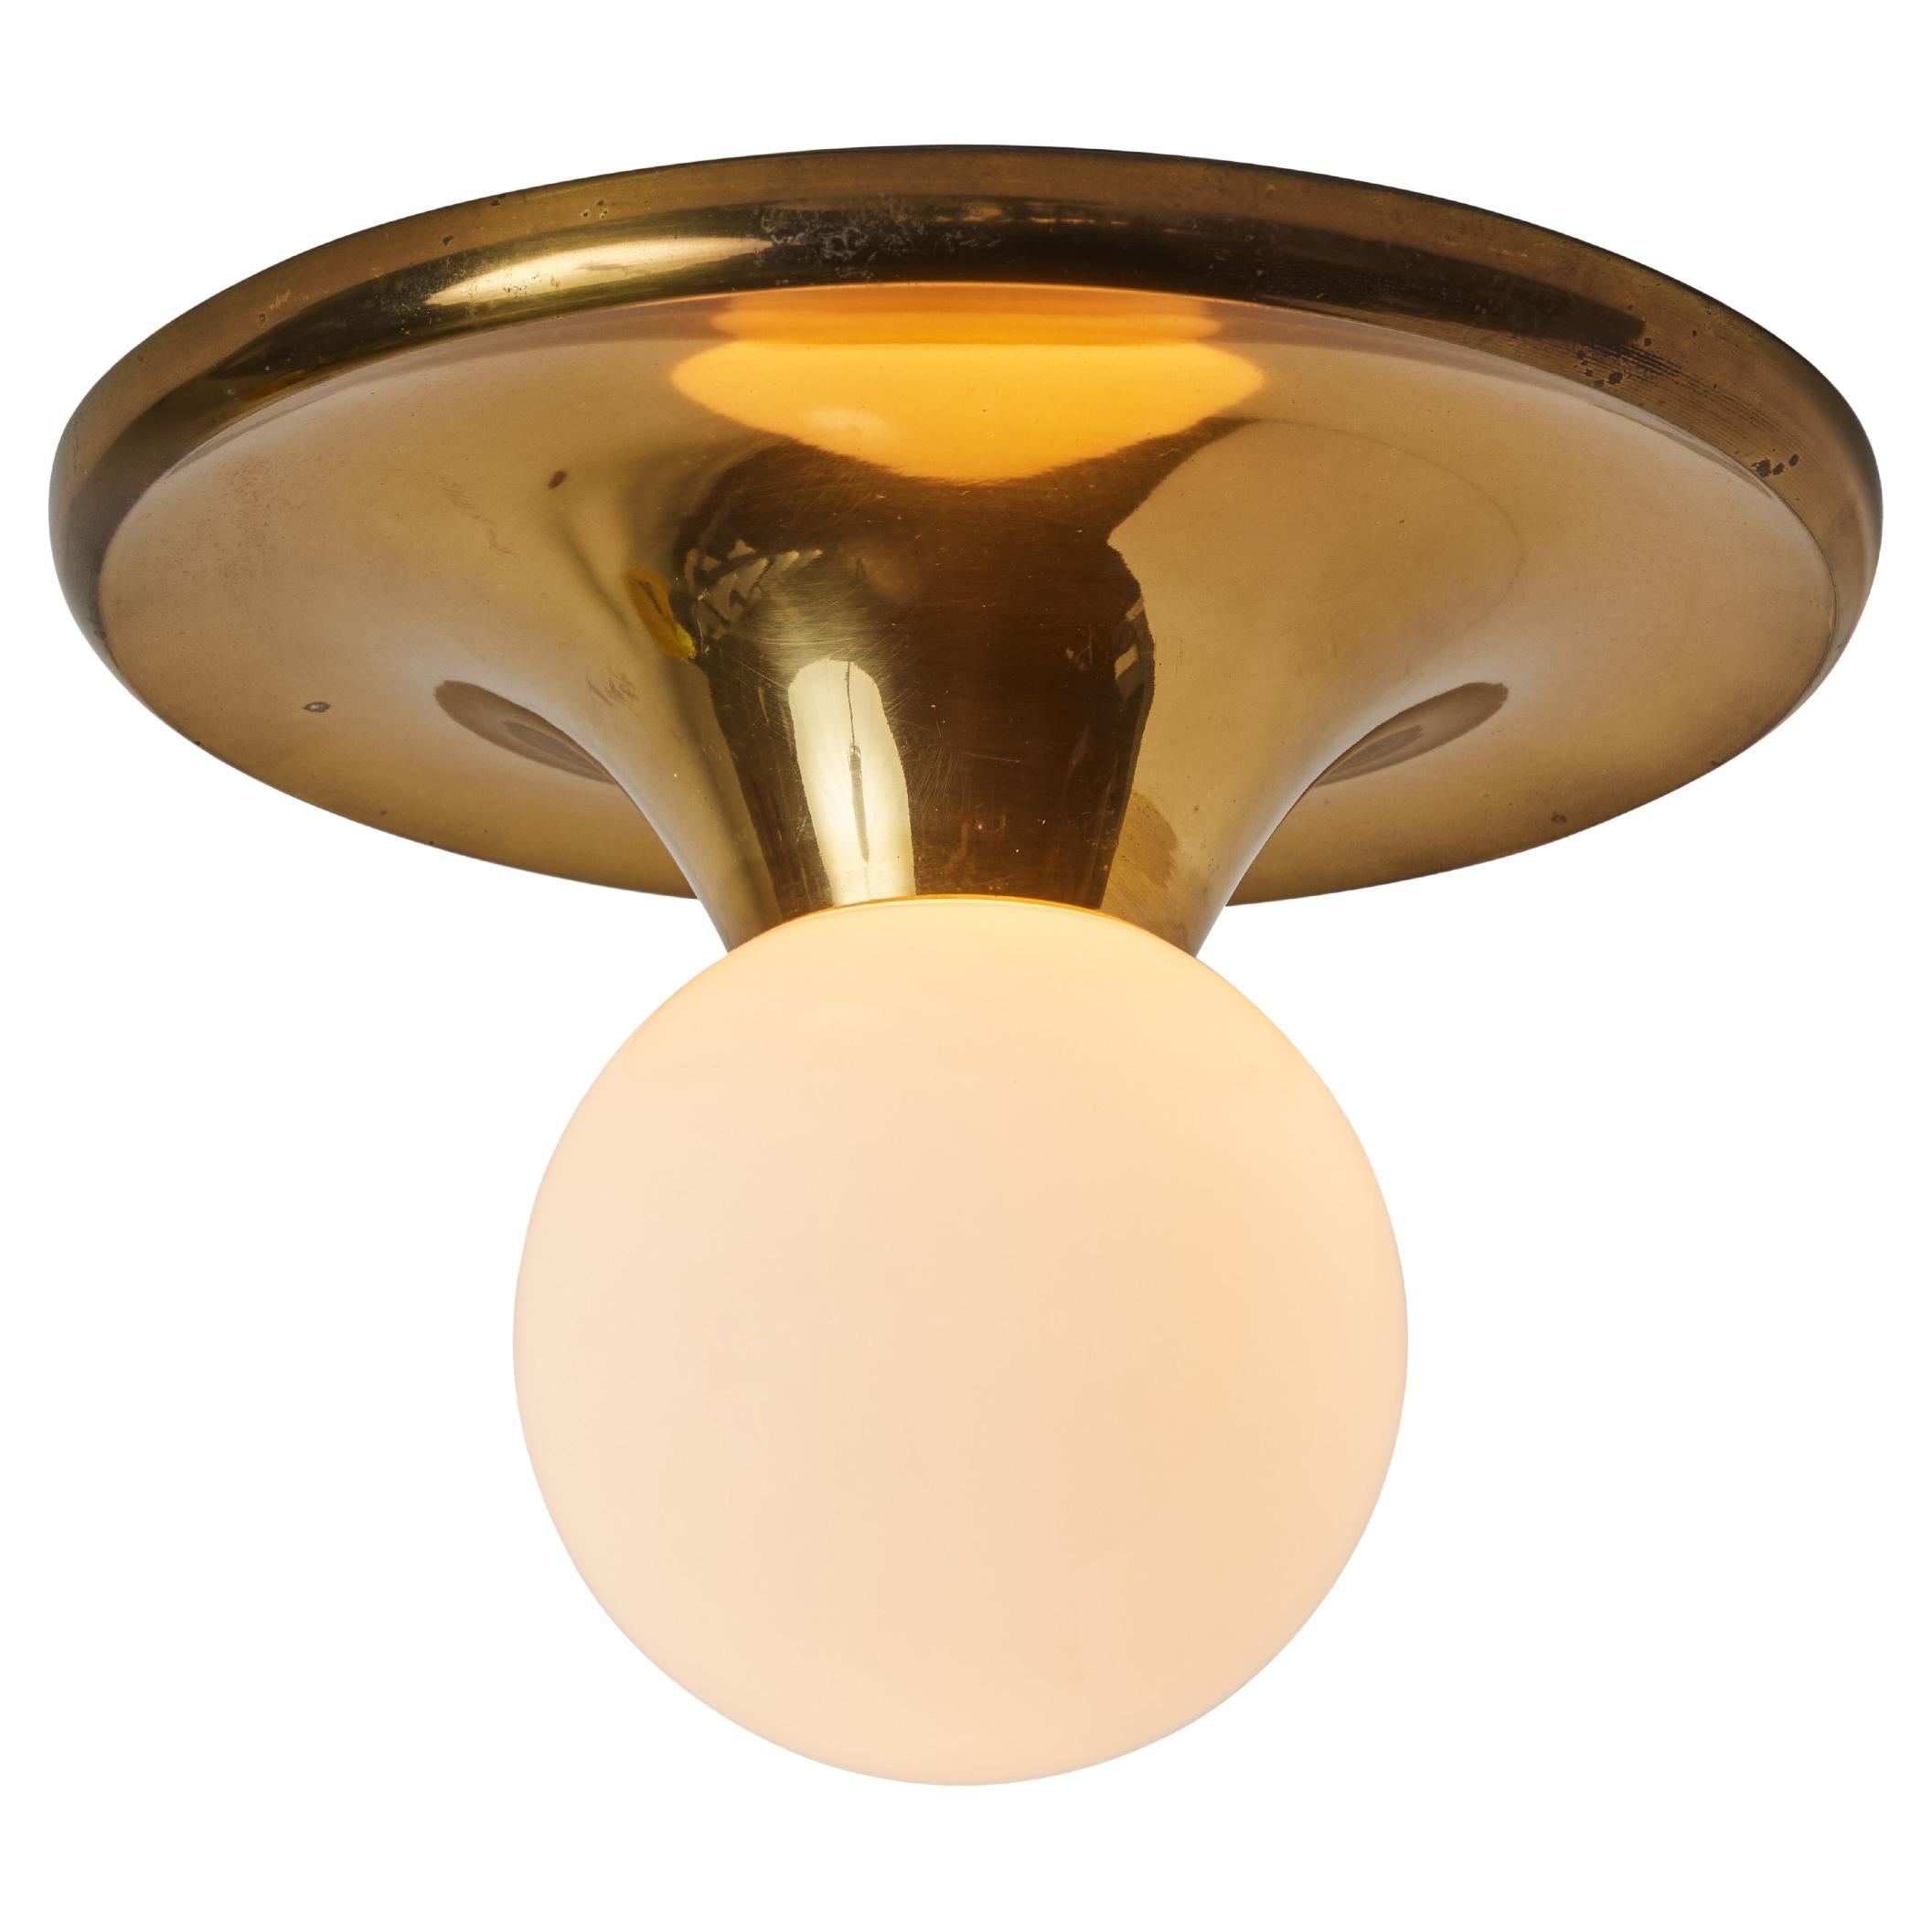 Large 1960s Achille Castiglioni & Pier Giacomo 'Light Ball' Wall or Ceiling Lamp For Sale